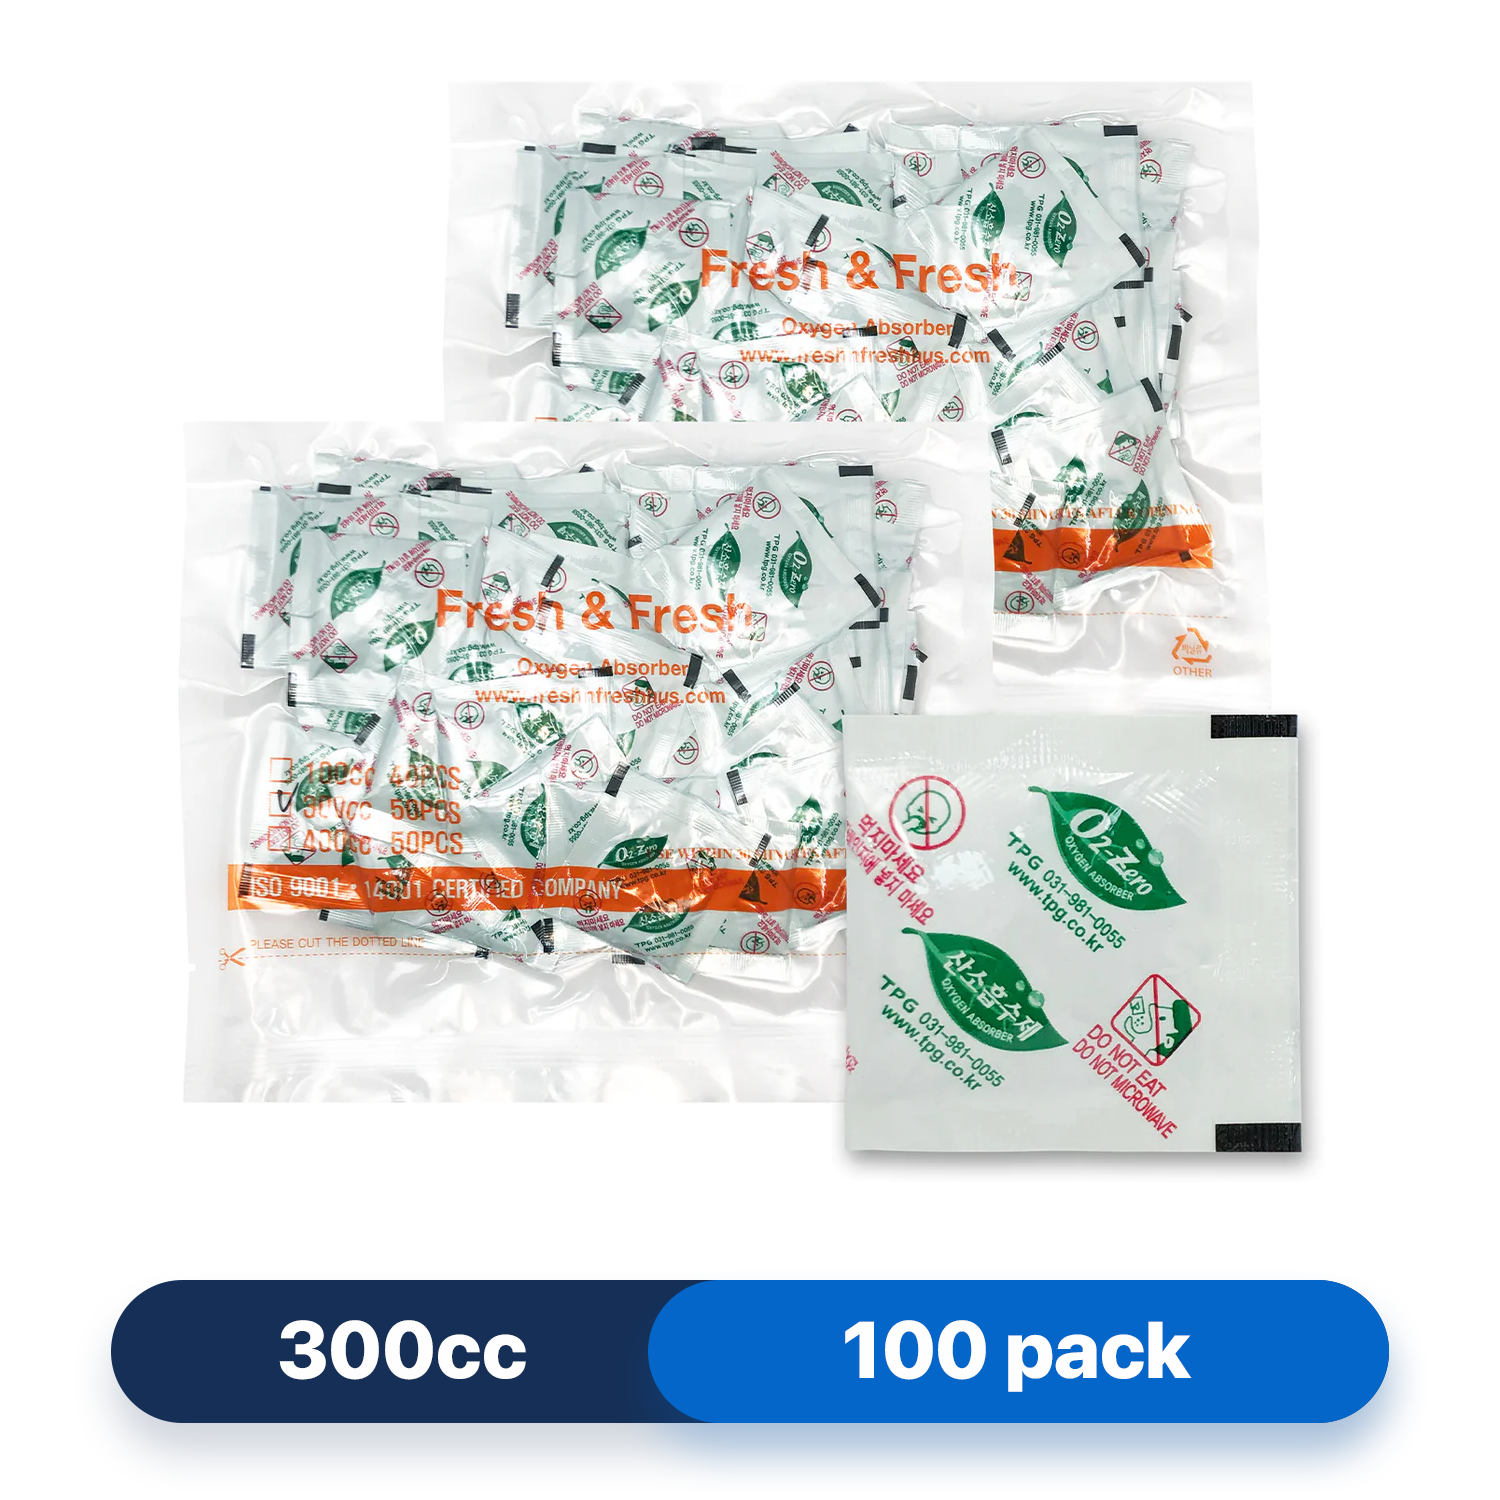 Fresh & Fresh (100 Packs) 300 CC Premium Oxygen Absorbers(2 Bag of 50 Packets) - ISO 9001 & 14001 Certified Facility Manufactured